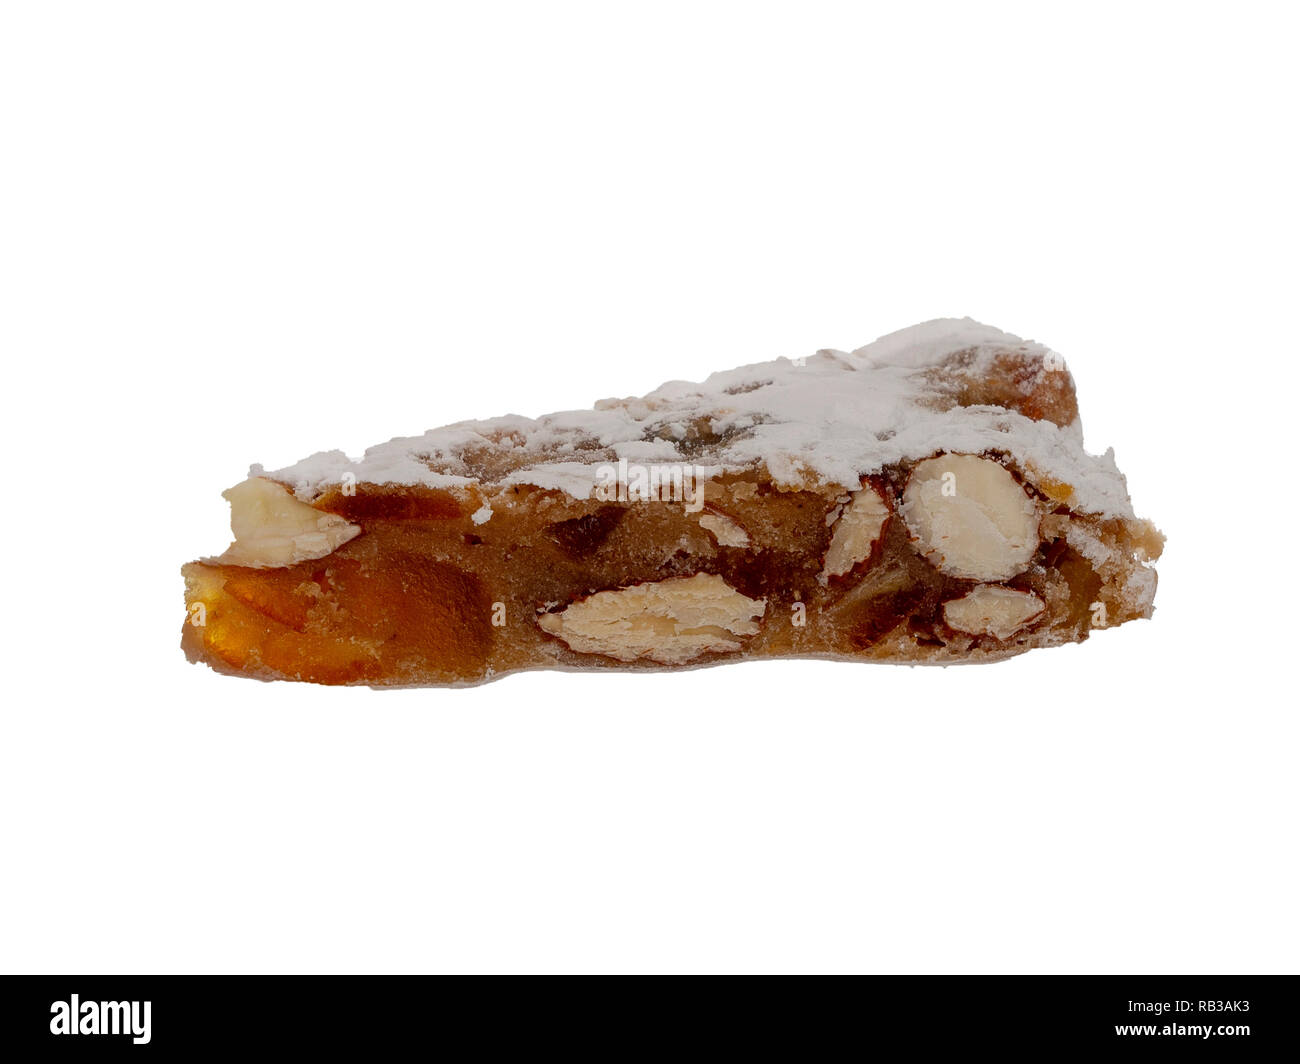 Panforte slice, isolated on white, Italian Christmas sweet dessert, cake make with dried fruits and nuts. Stock Photo